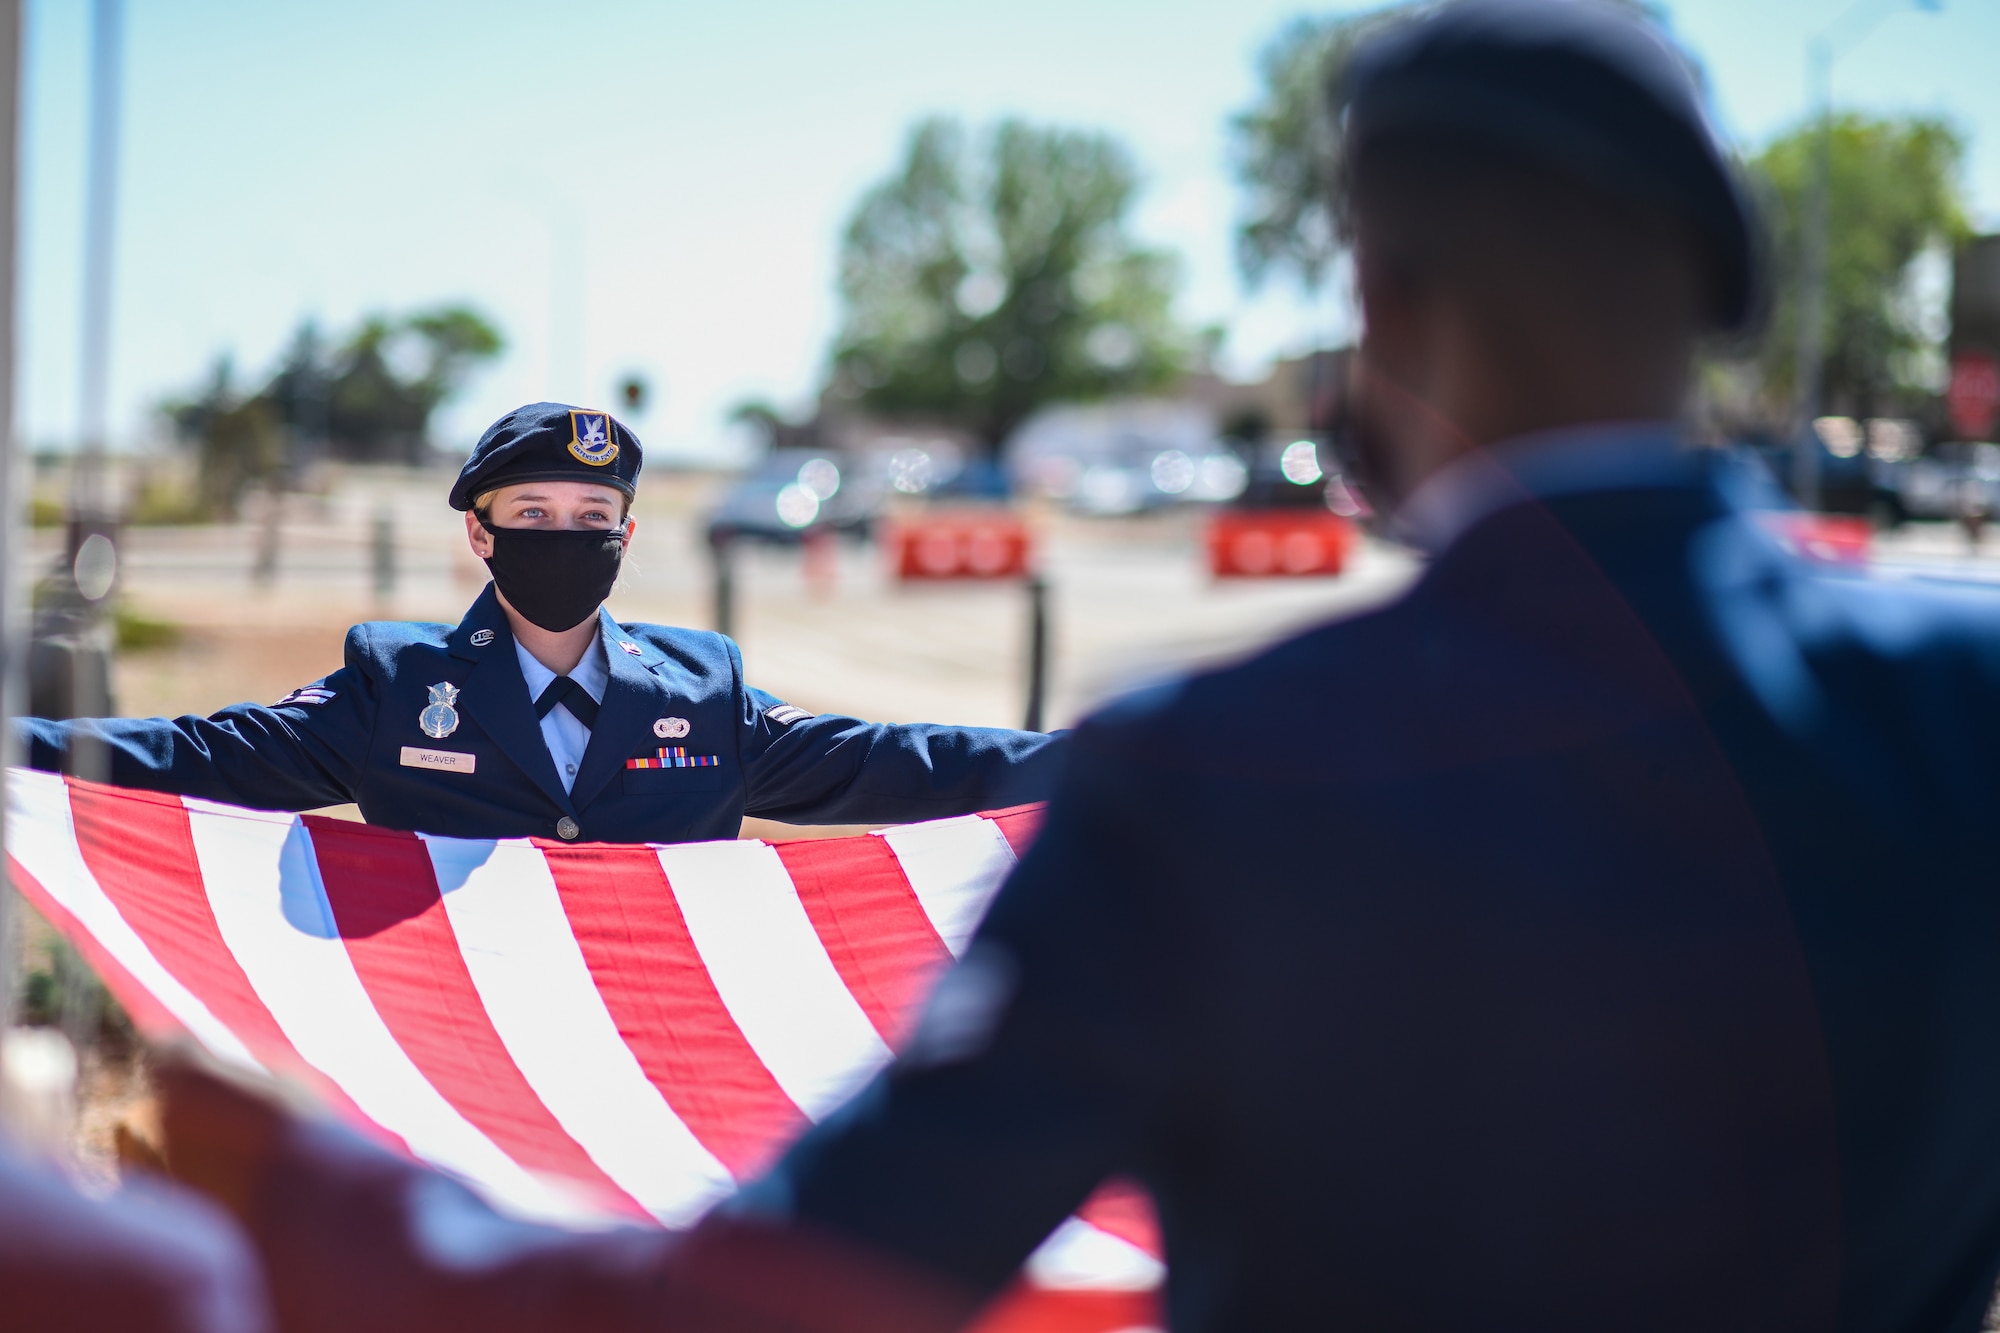 Two Security Forces Airmen in their dress blues uniform hold a flag open as they stand at the position of attention.